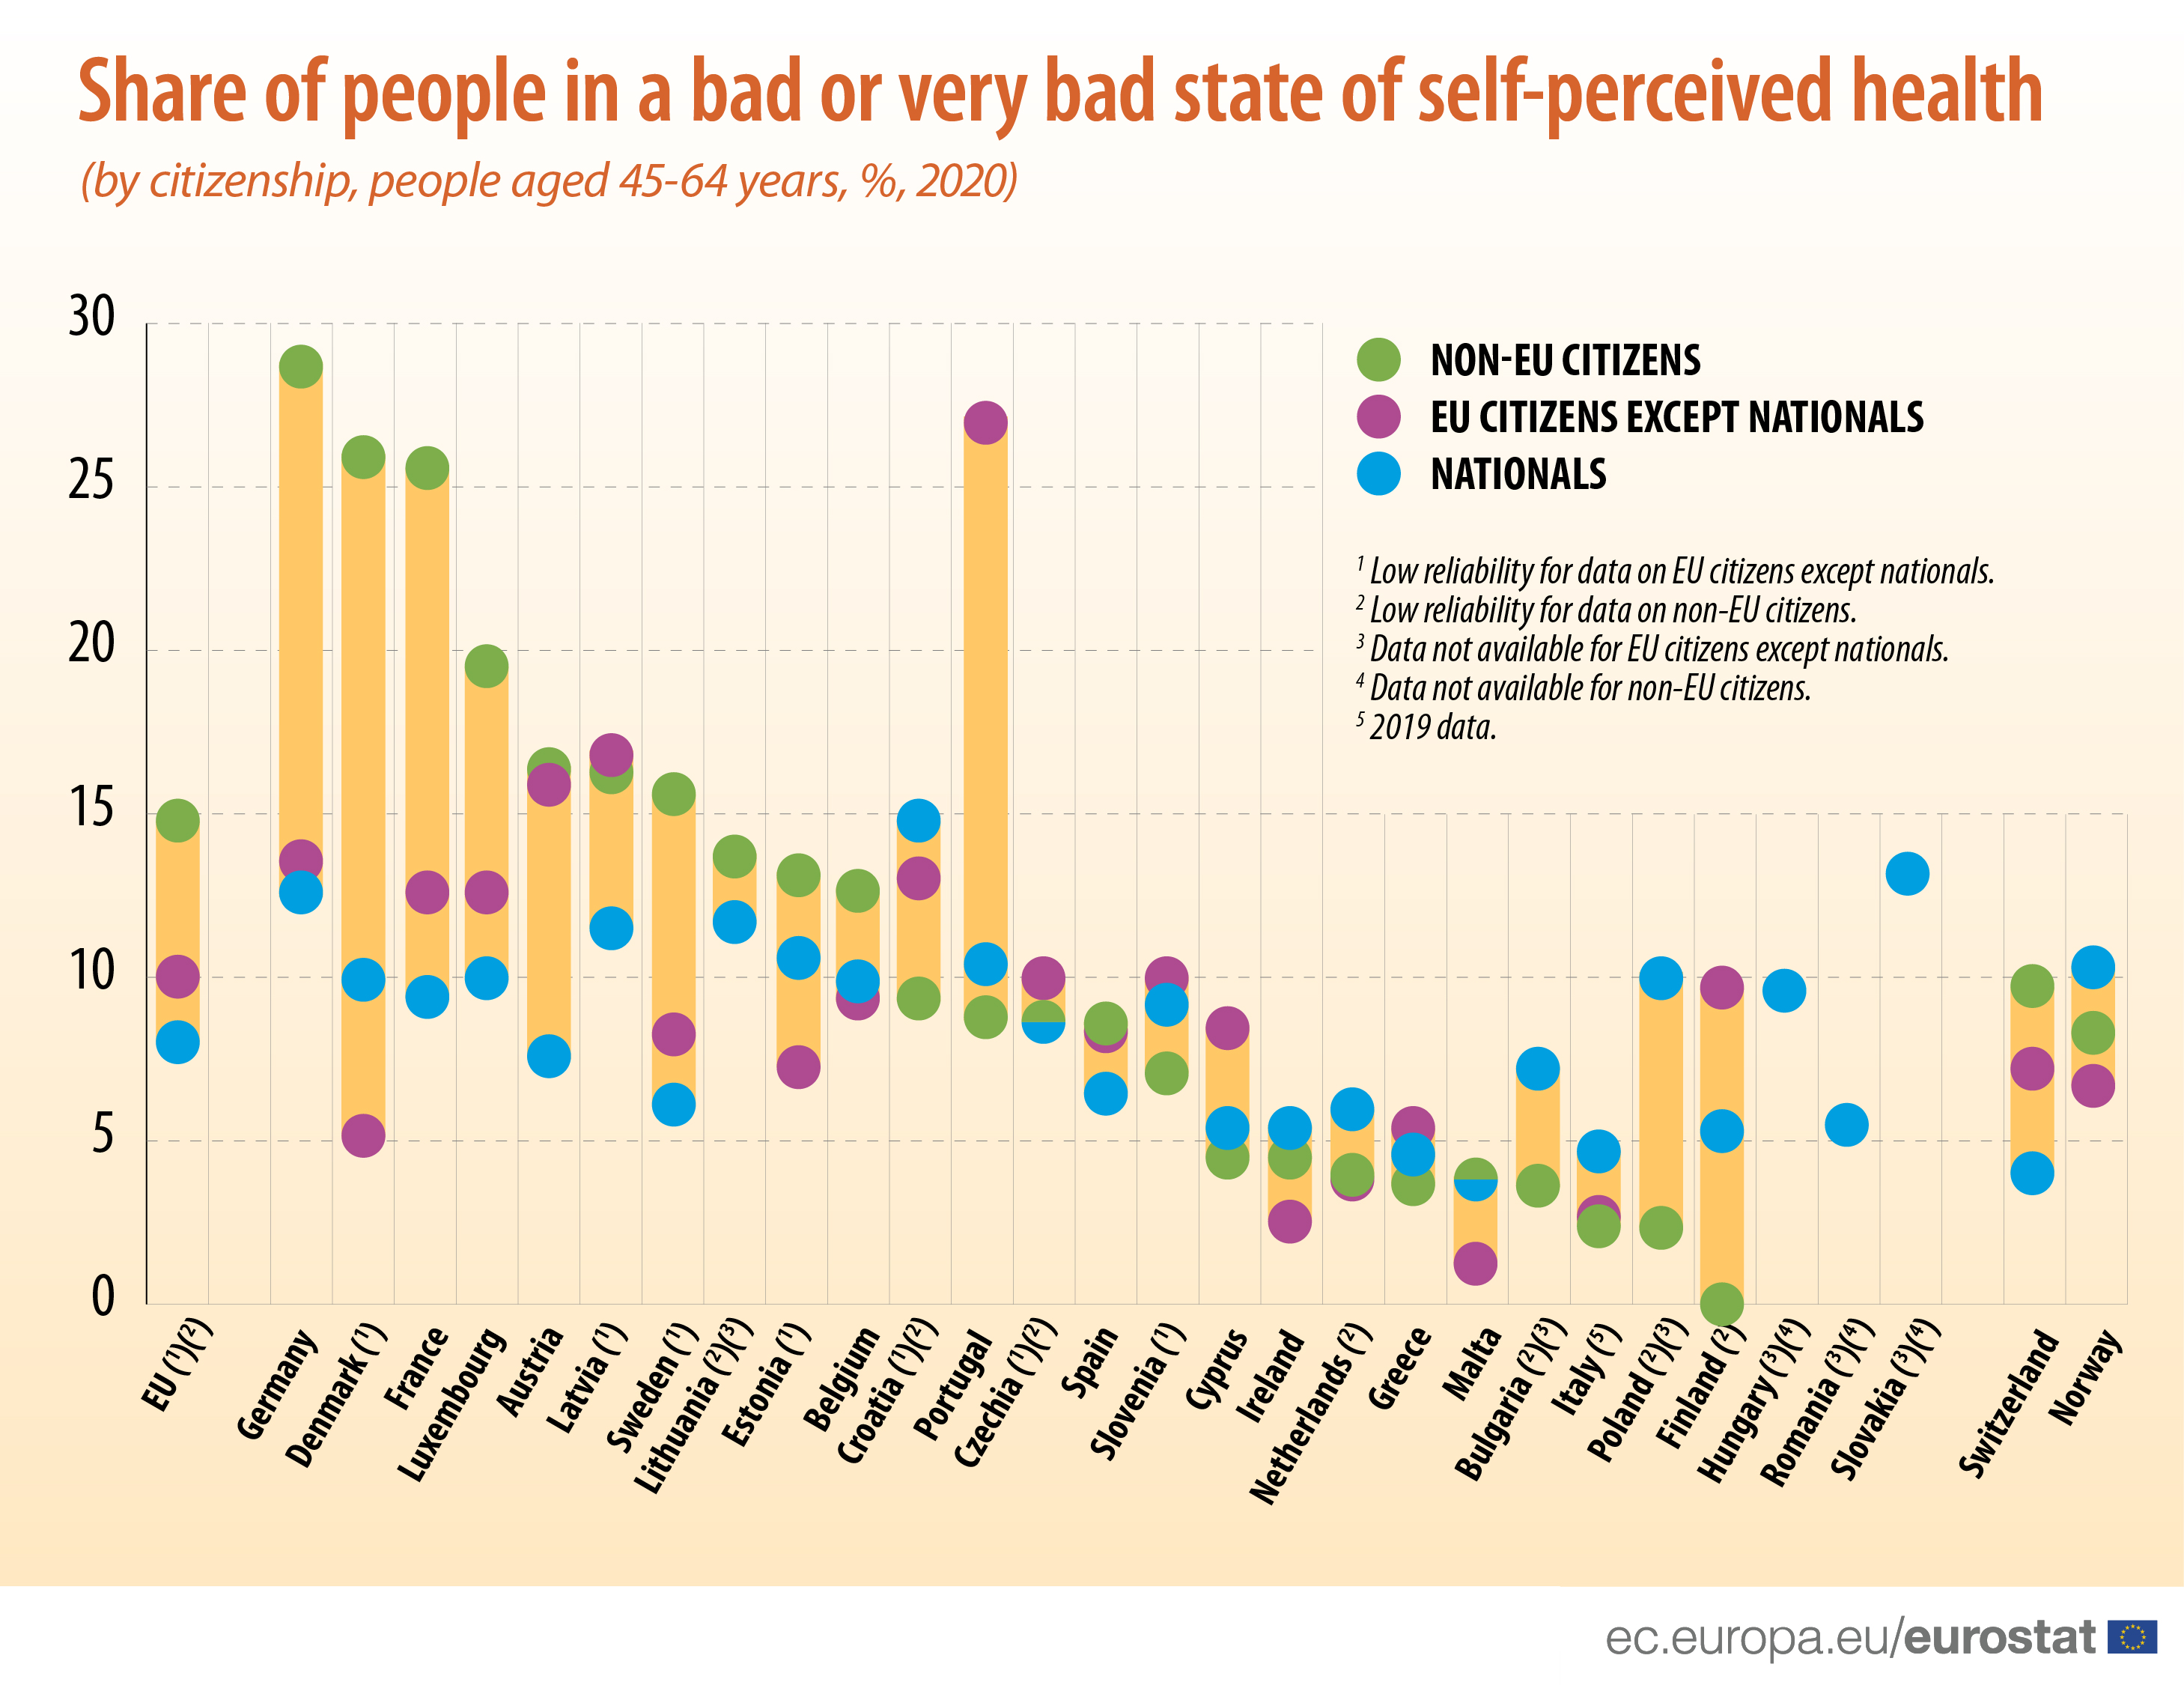 Scatter plot: Share of people in a bad or very bad state of self-perceived health, by citizenship, people aged 45-64 years old, in %, in 2020